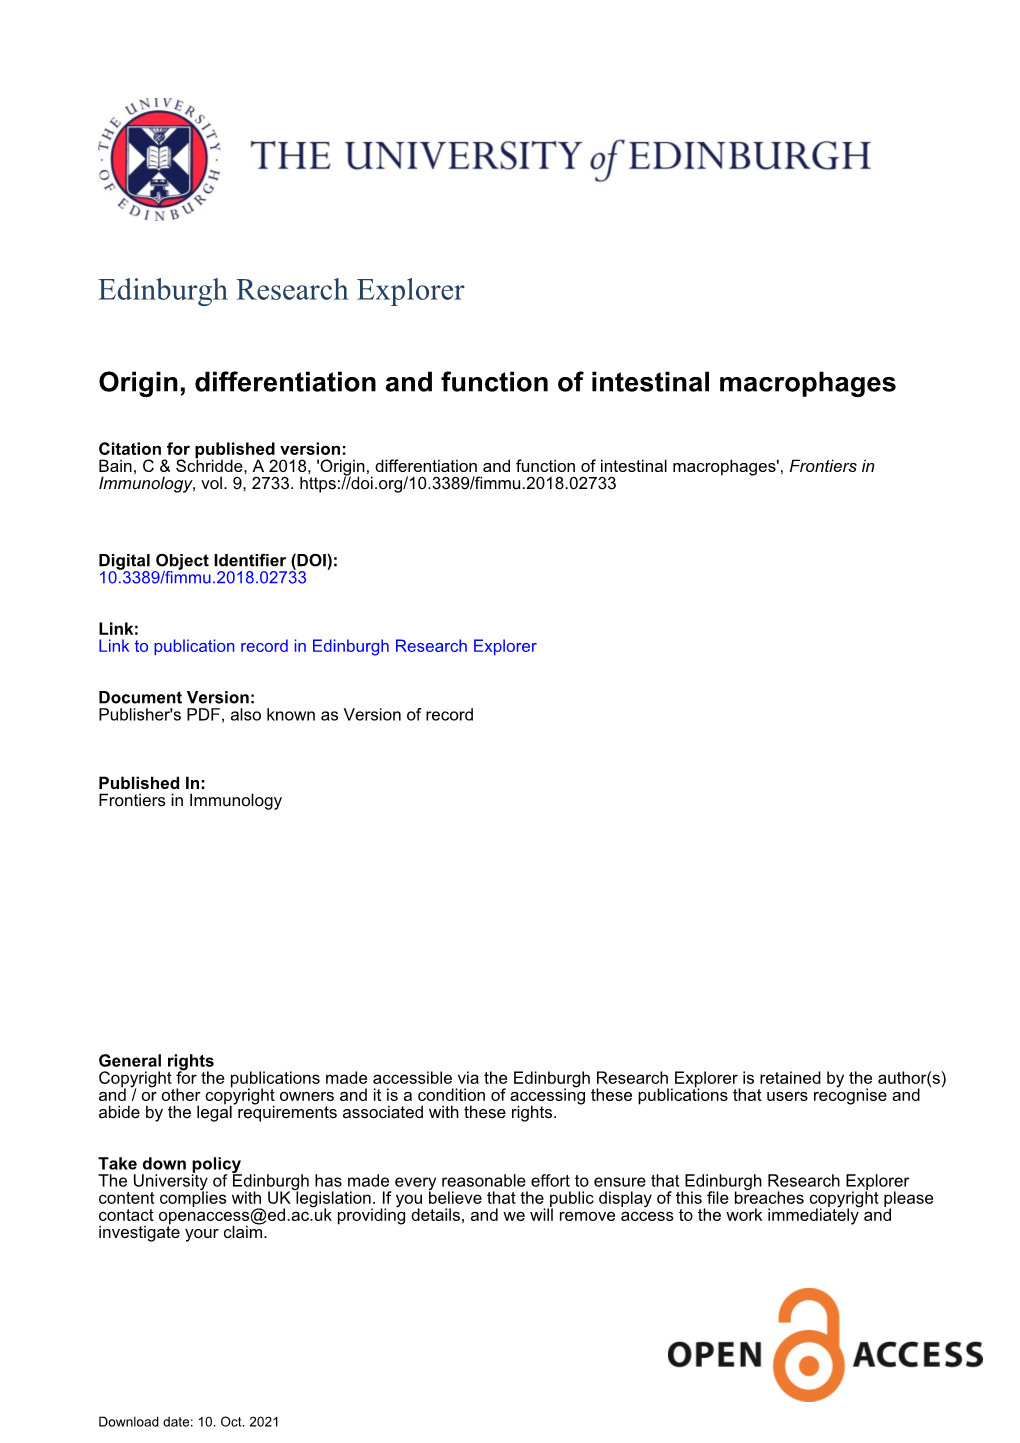 Origin, Differentiation, and Function of Intestinal Macrophages